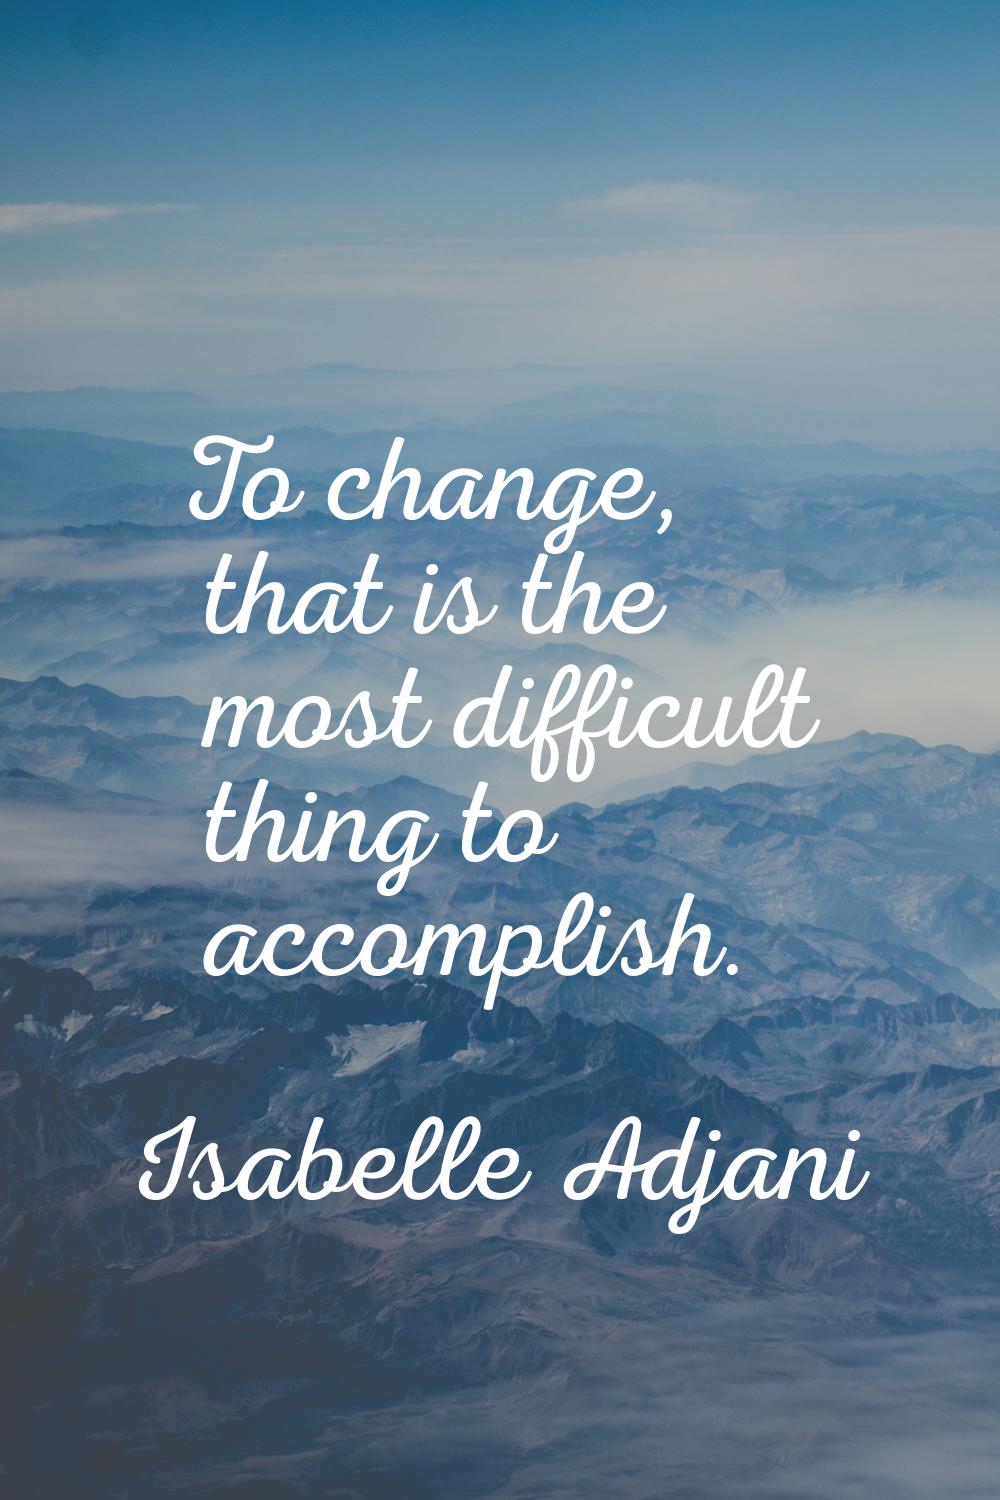 To change, that is the most difficult thing to accomplish.